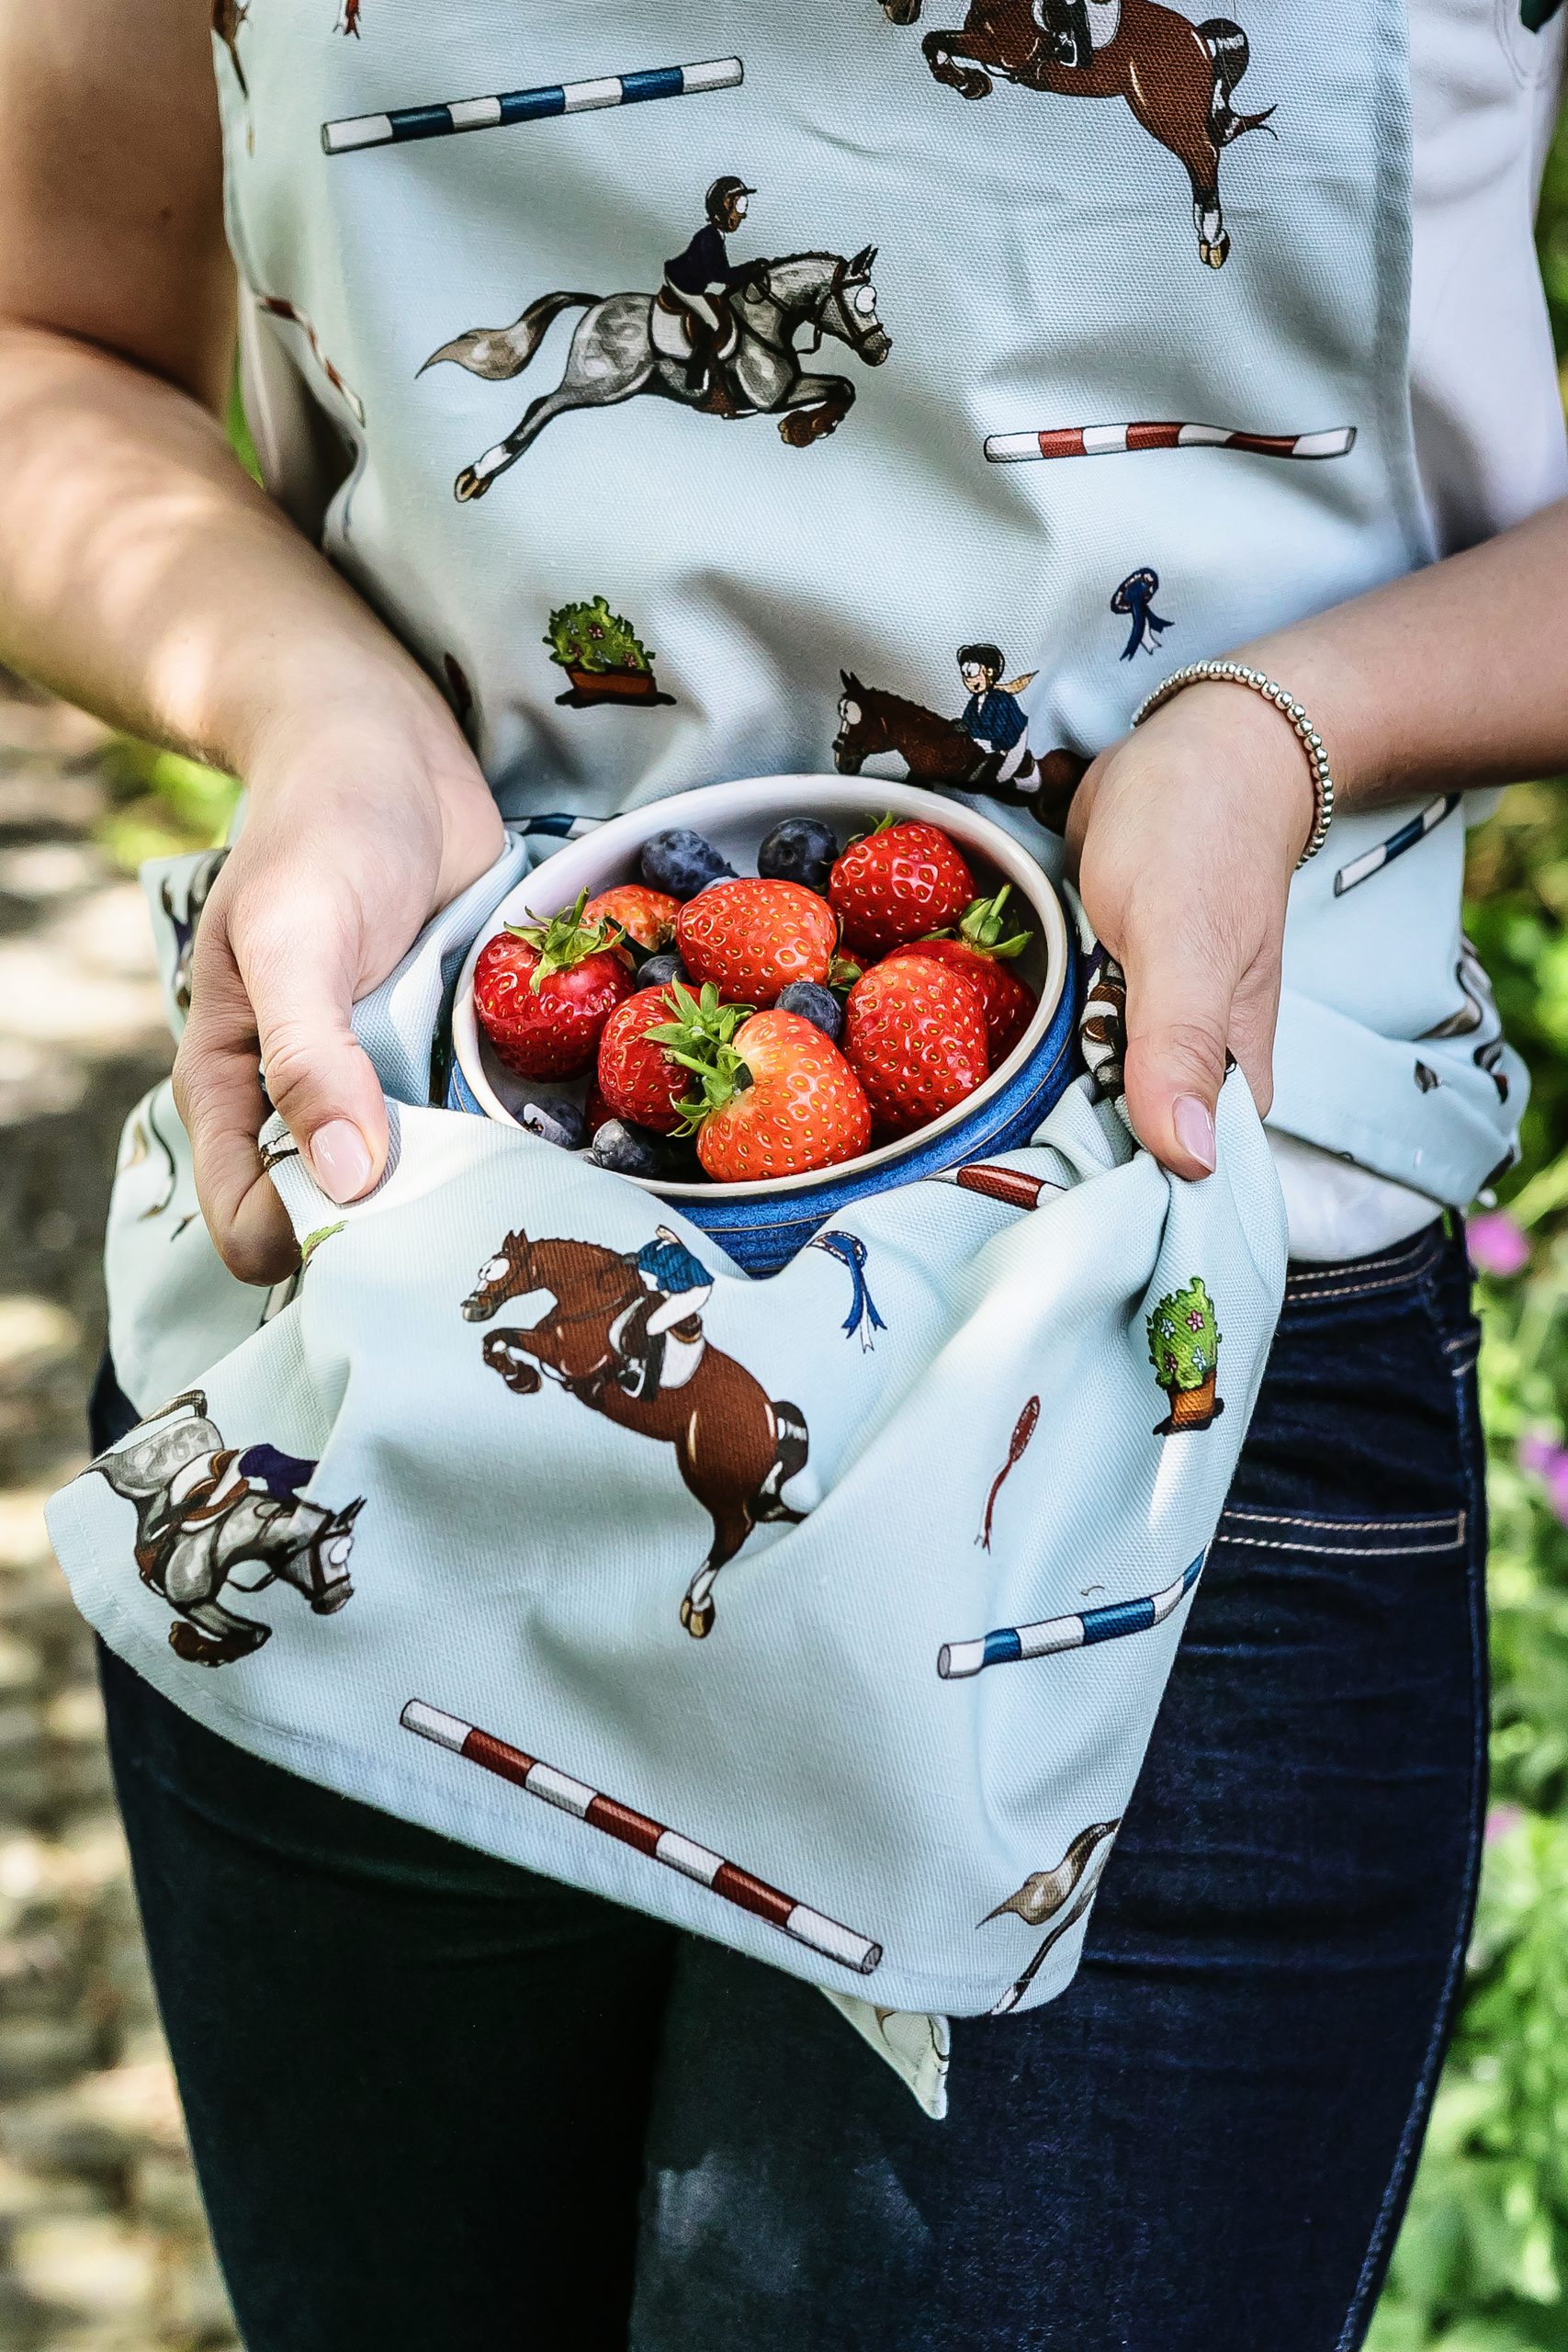 Showjumping patterned apron underneath a bowl of strawberries